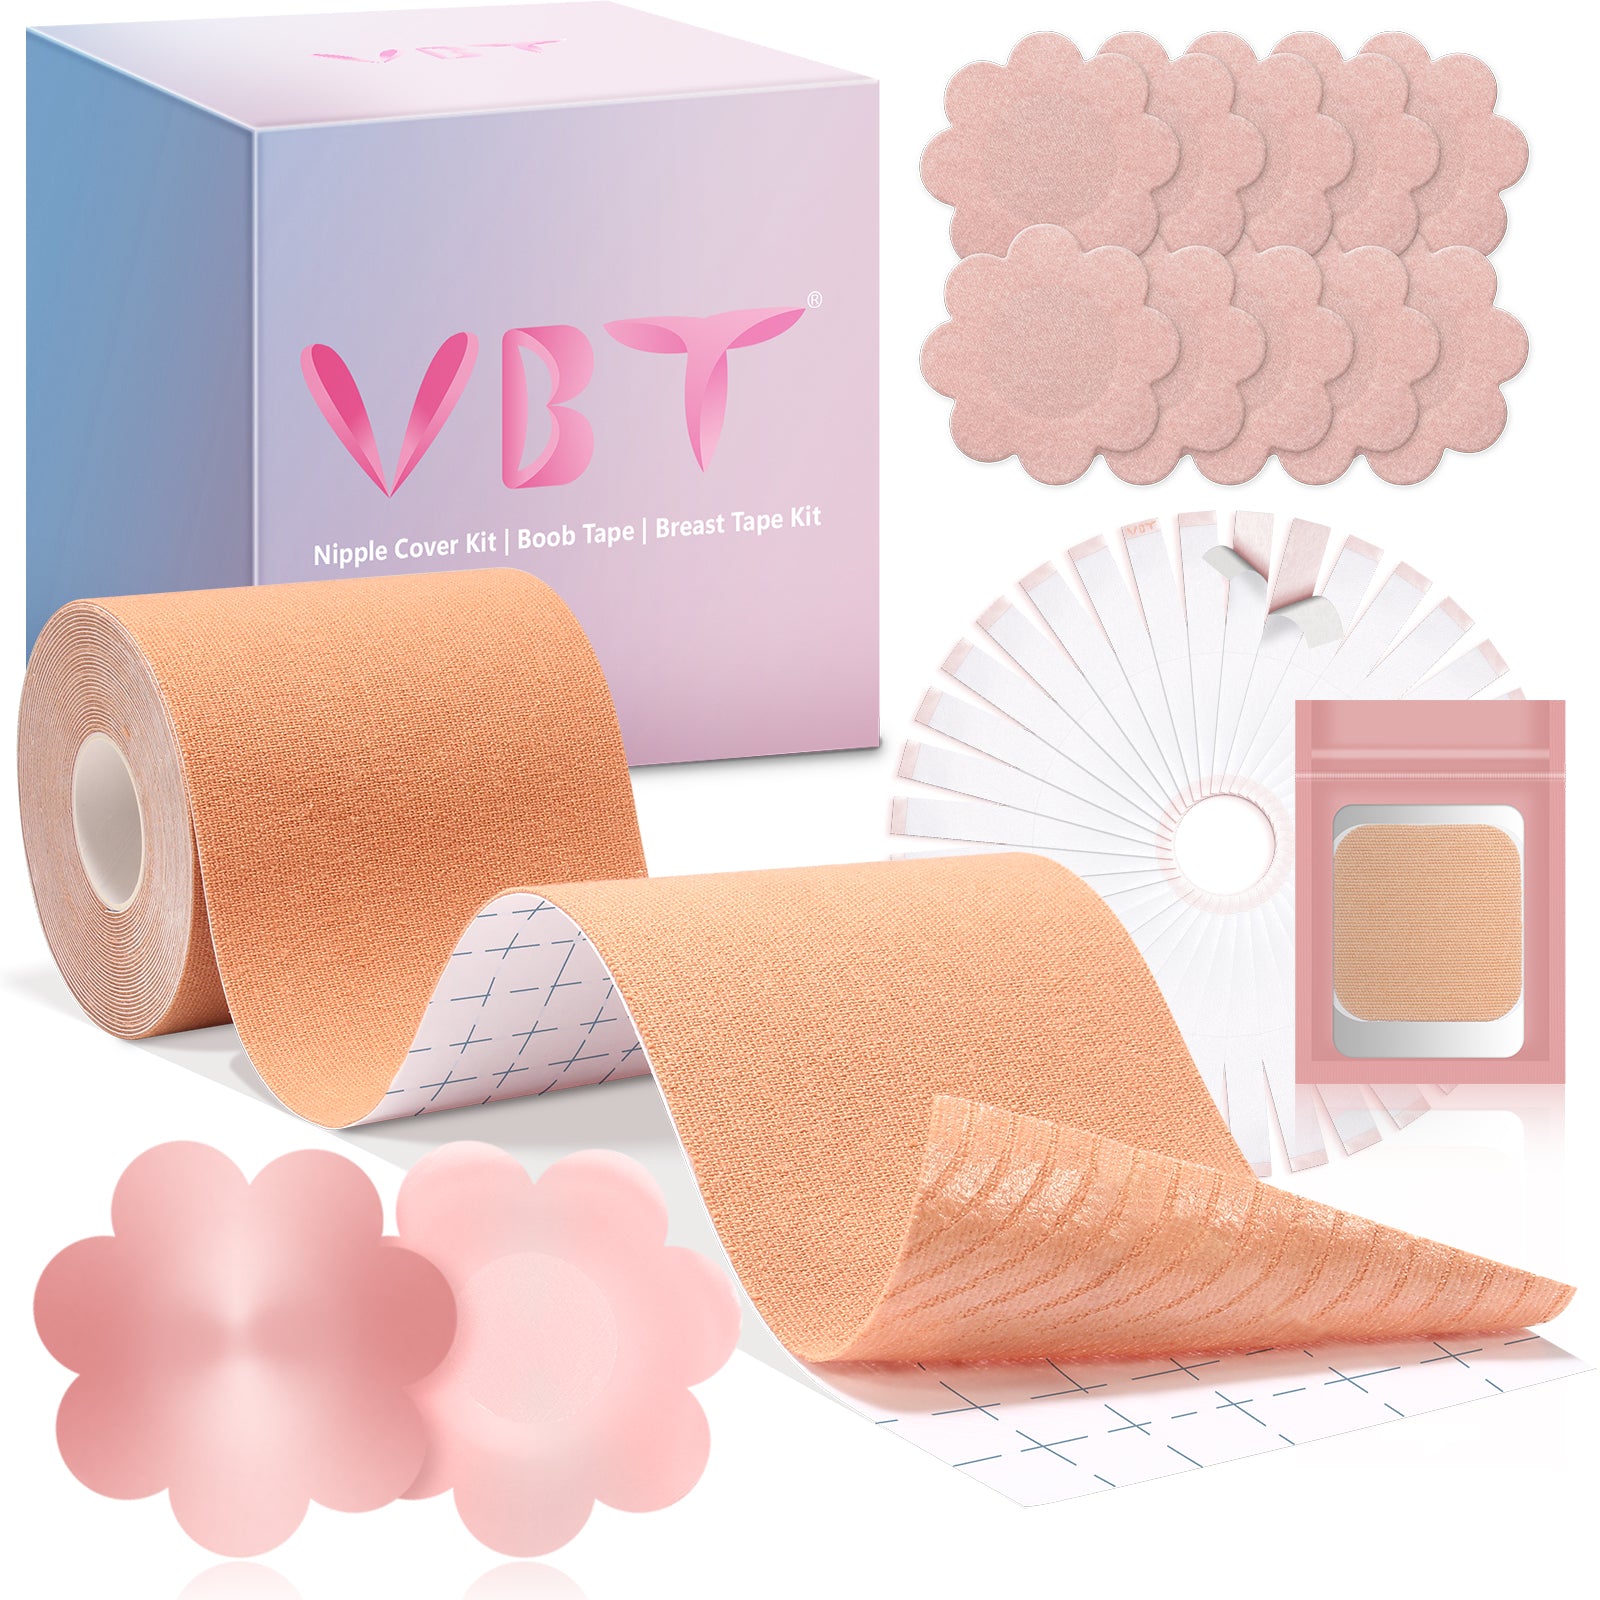 VBT Boob Tape, Replace Your Bra-Instant Breast Tape, Suitable for A-G, –  VBT BOOB TAPE